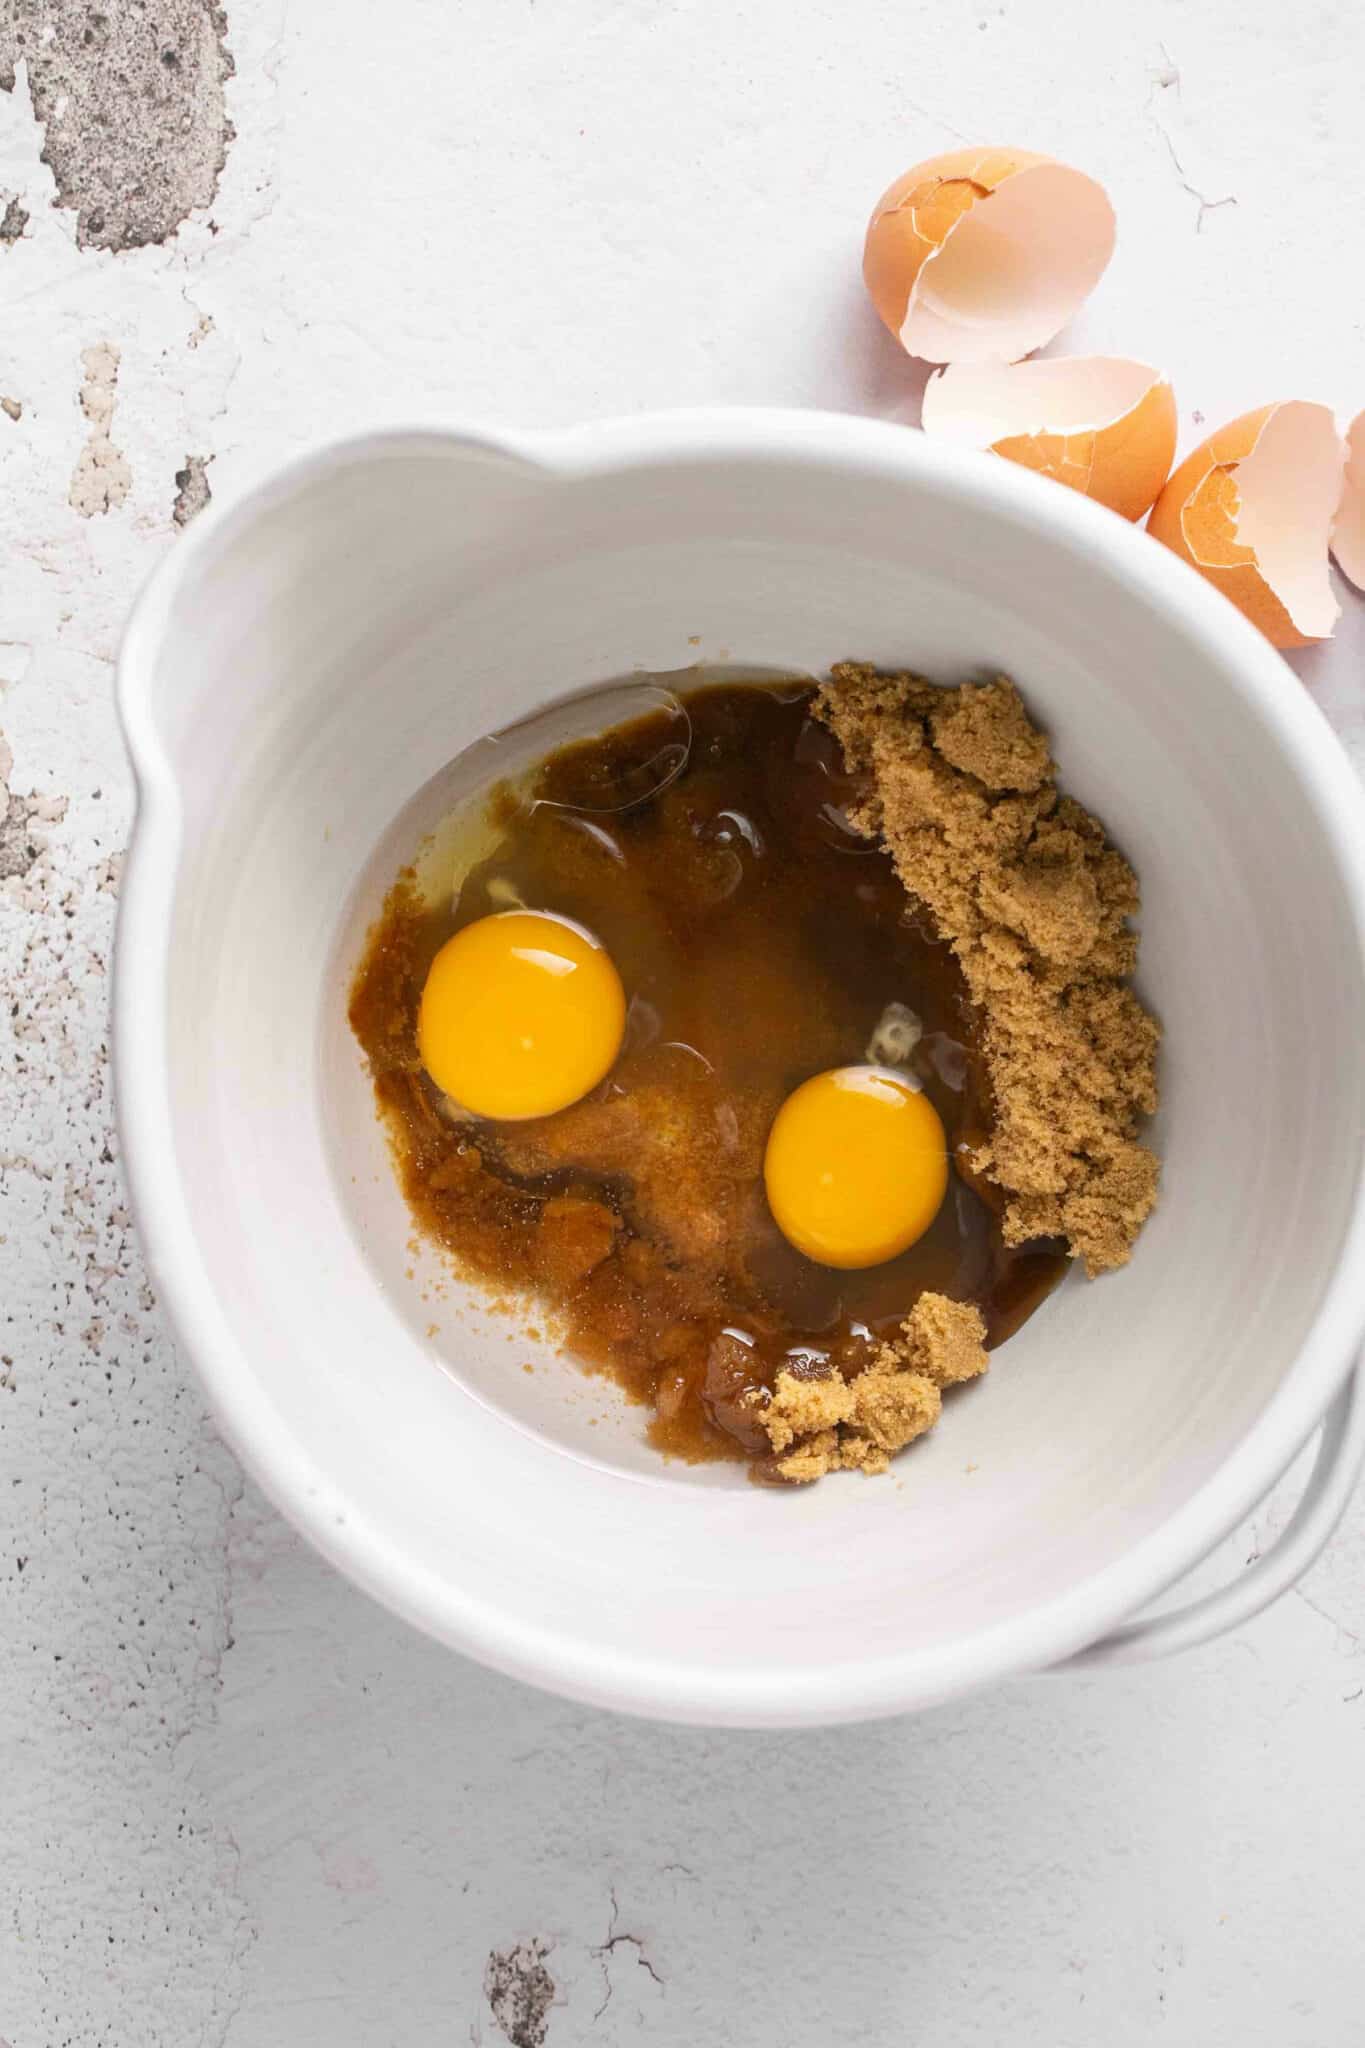 Eggs in a bowl with oil and brown sugar.